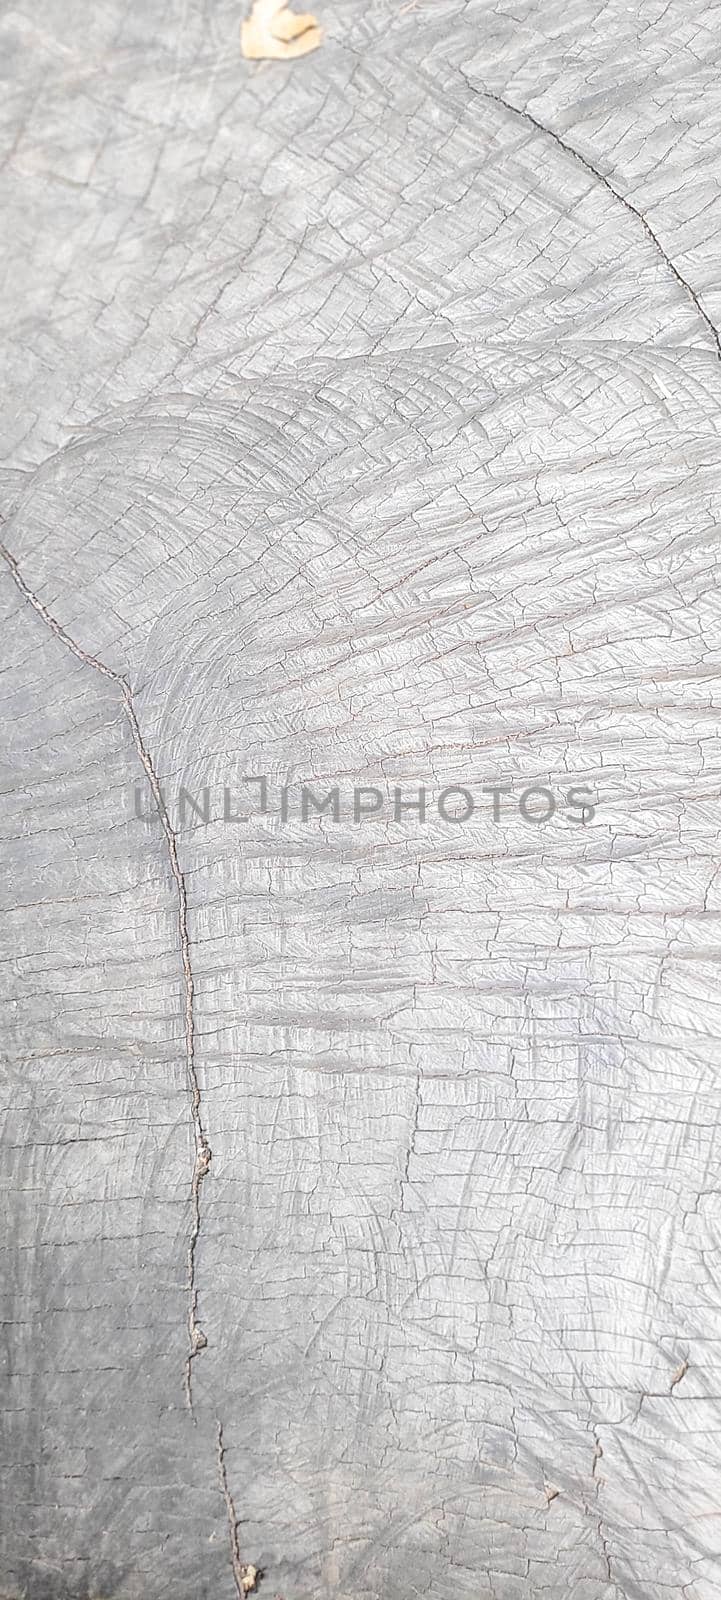 tree trunk with dark texture and abstract lines, from cut wood